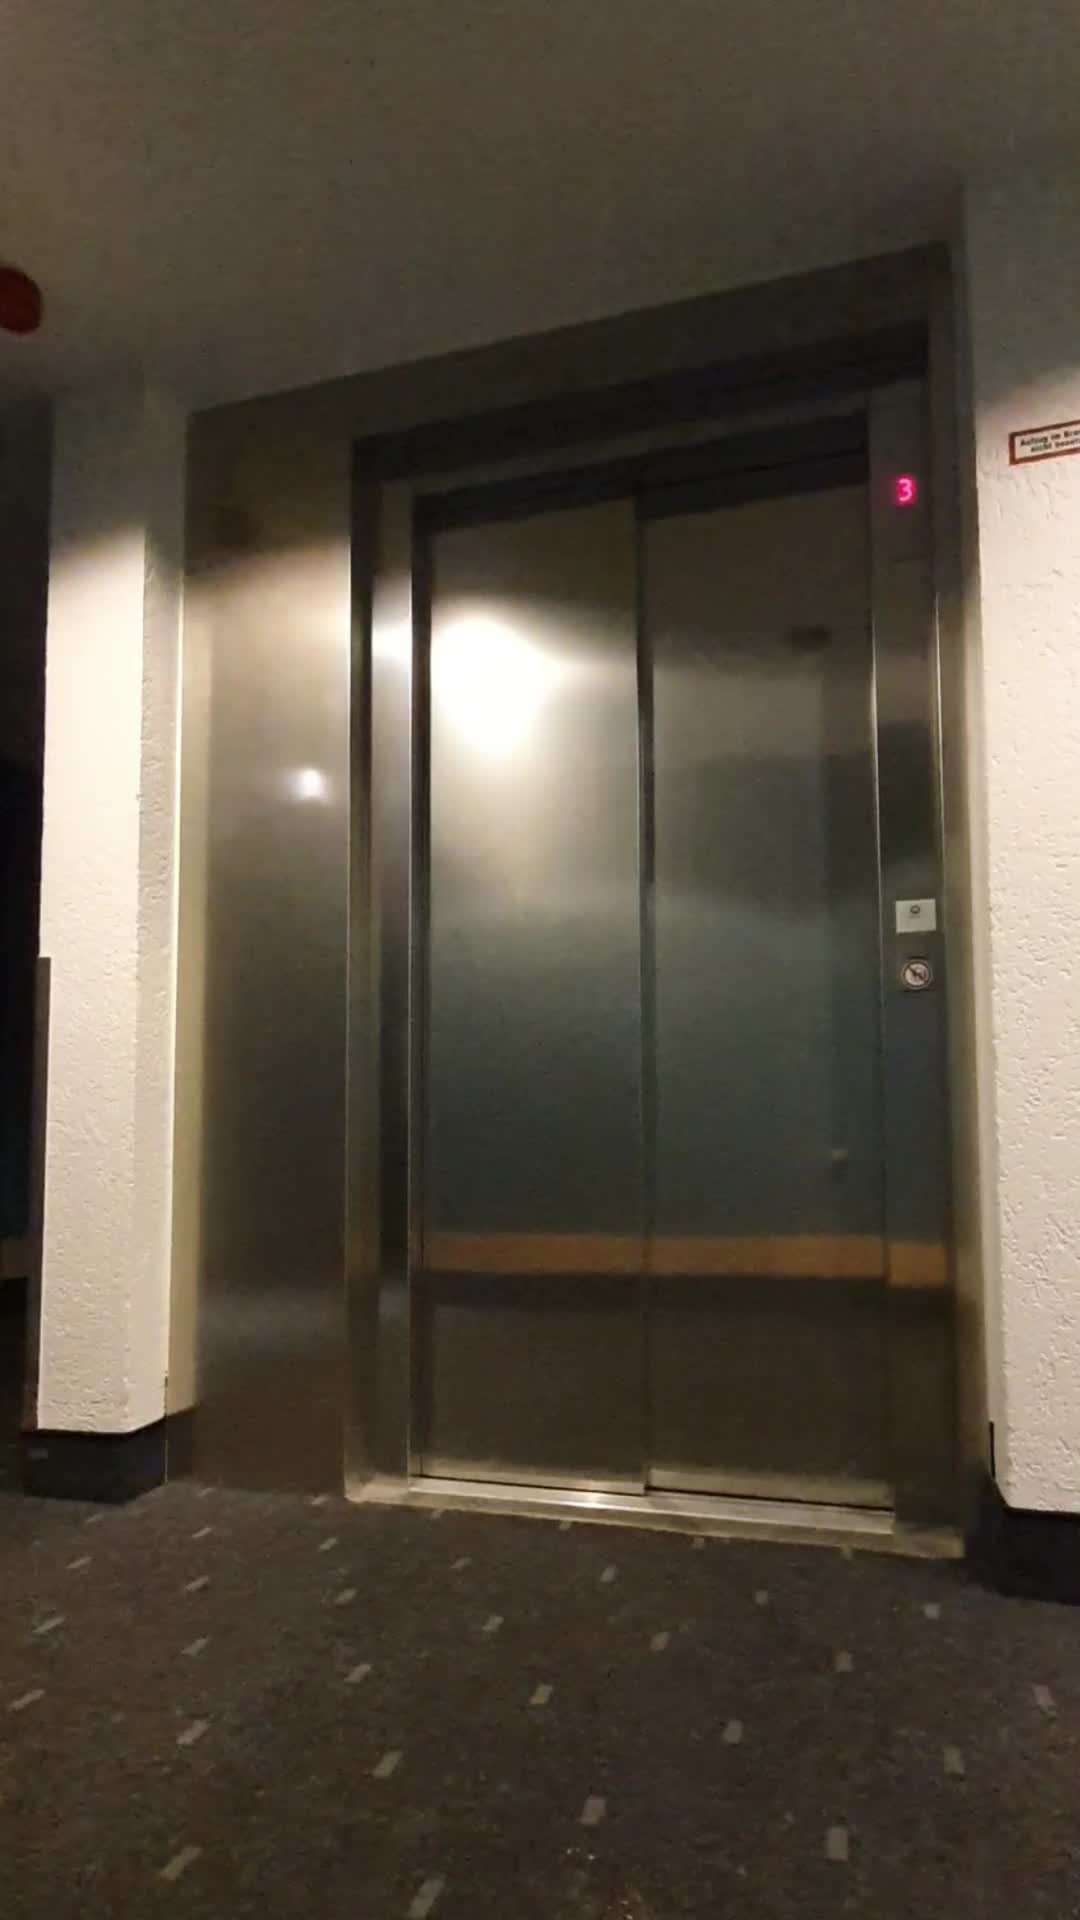 Naked caught hotel lift